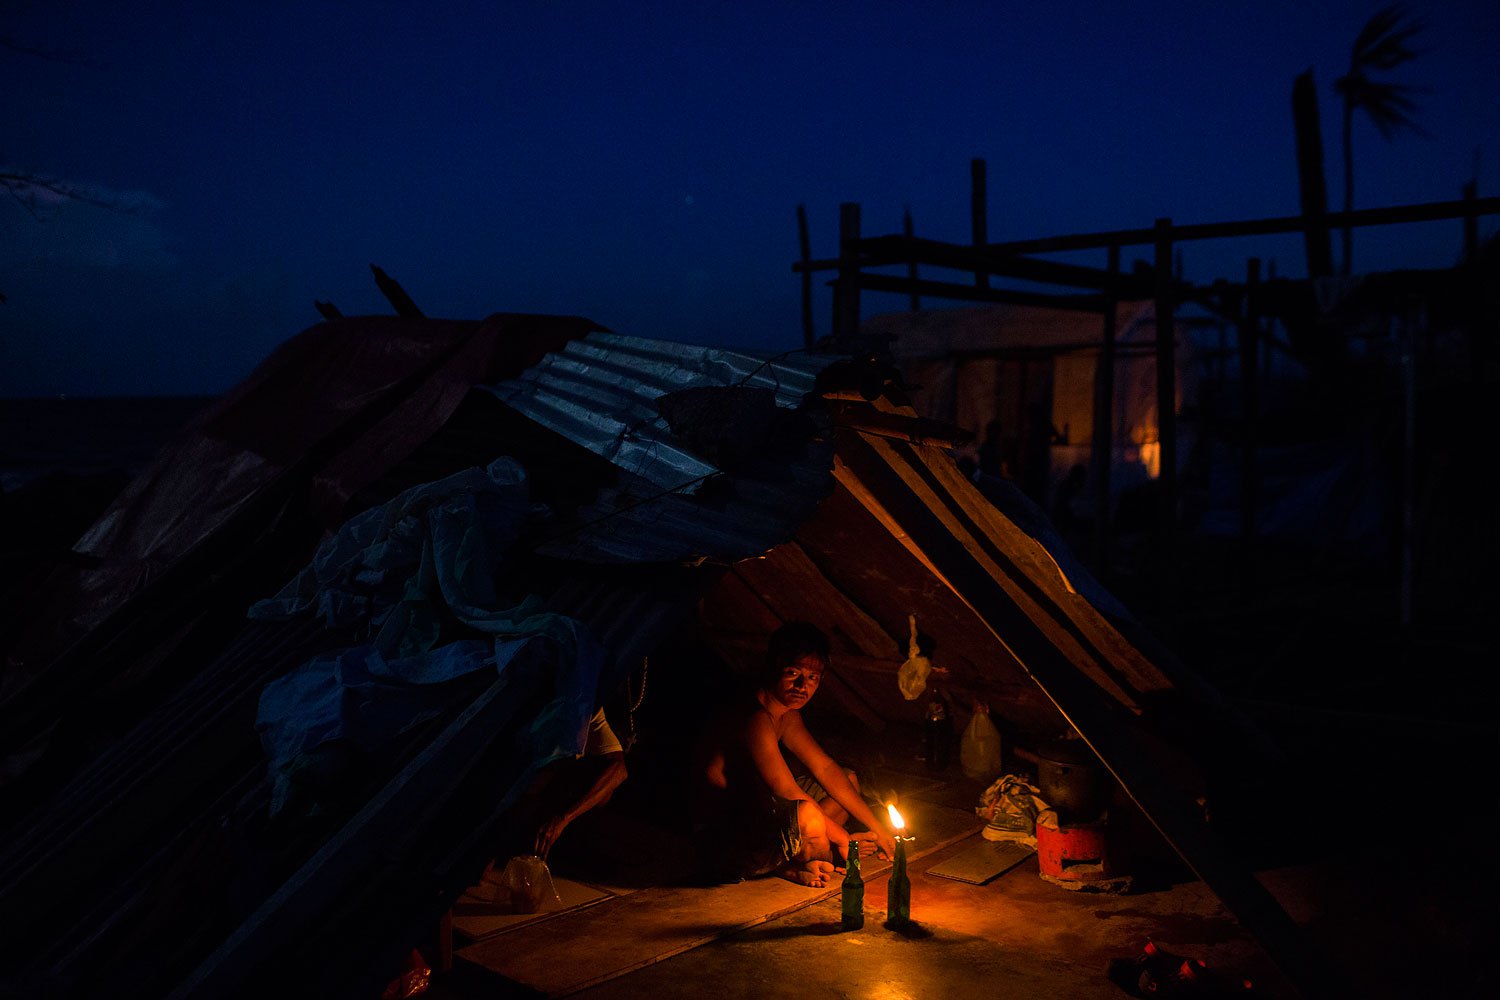 A man who's home was destroyed by Typhoon Haiyan sits by a candle light in the rubble of his home in Tanuan, Philippines on November 15, 2013.